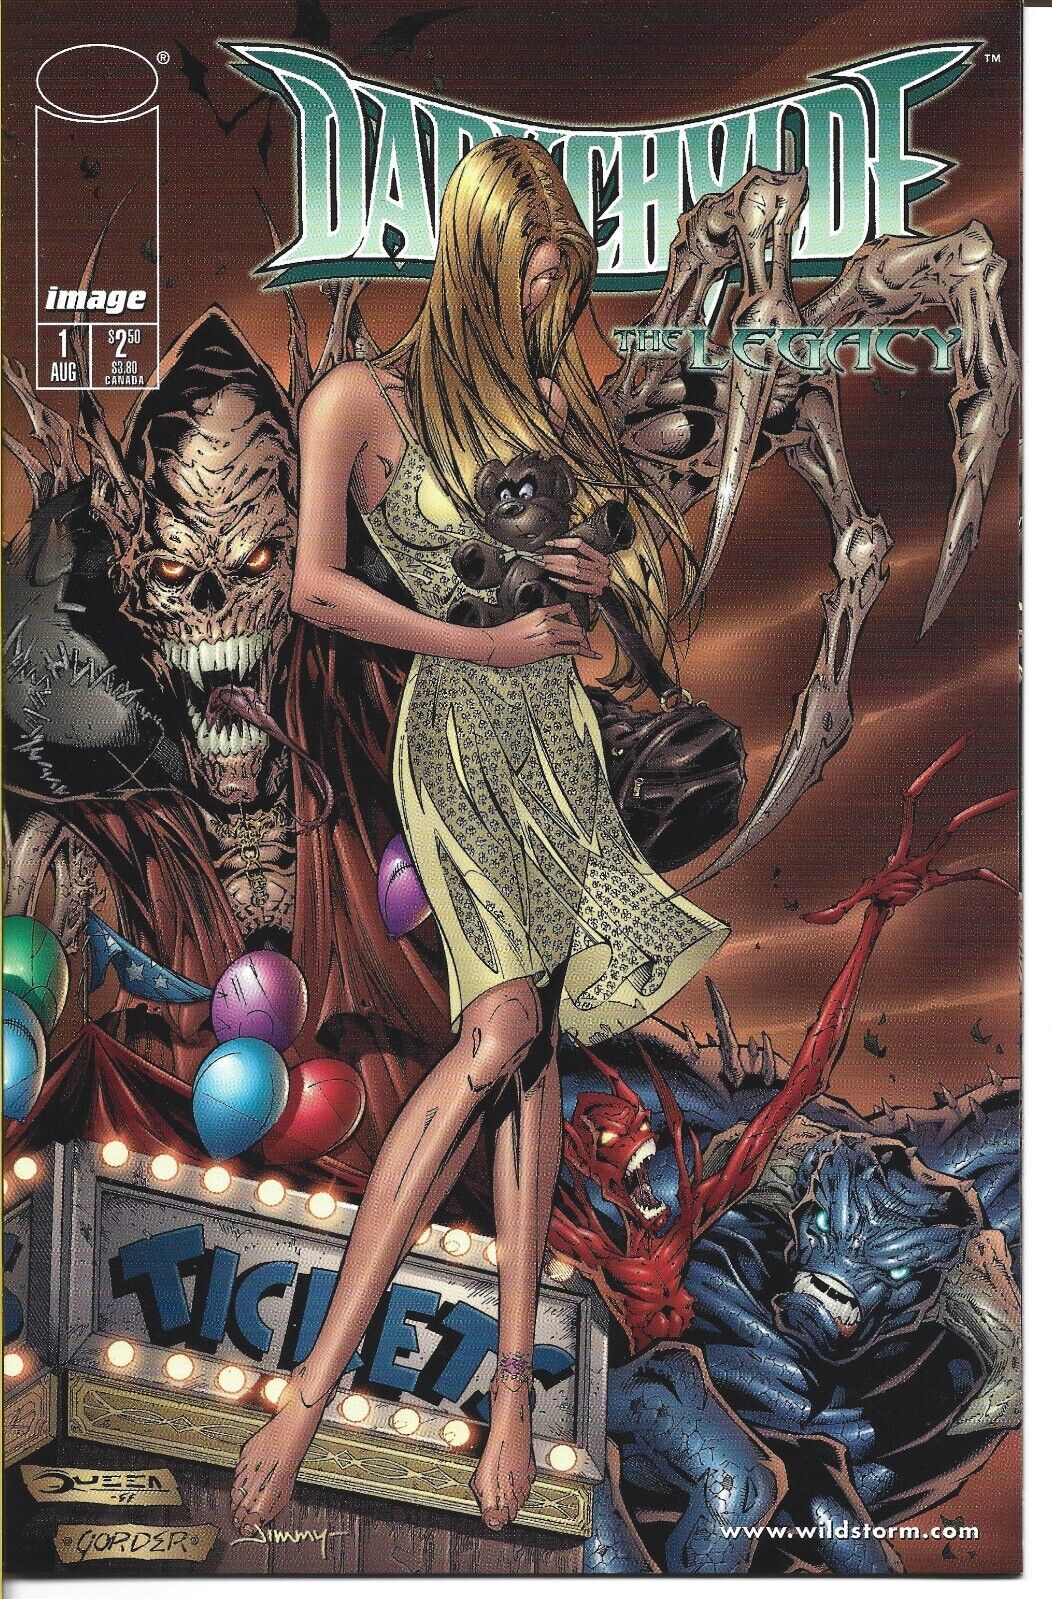 DARKCHYLDE THE LEGACY #1 IMAGE COMICS 1998 BAGGED AND BOARDED